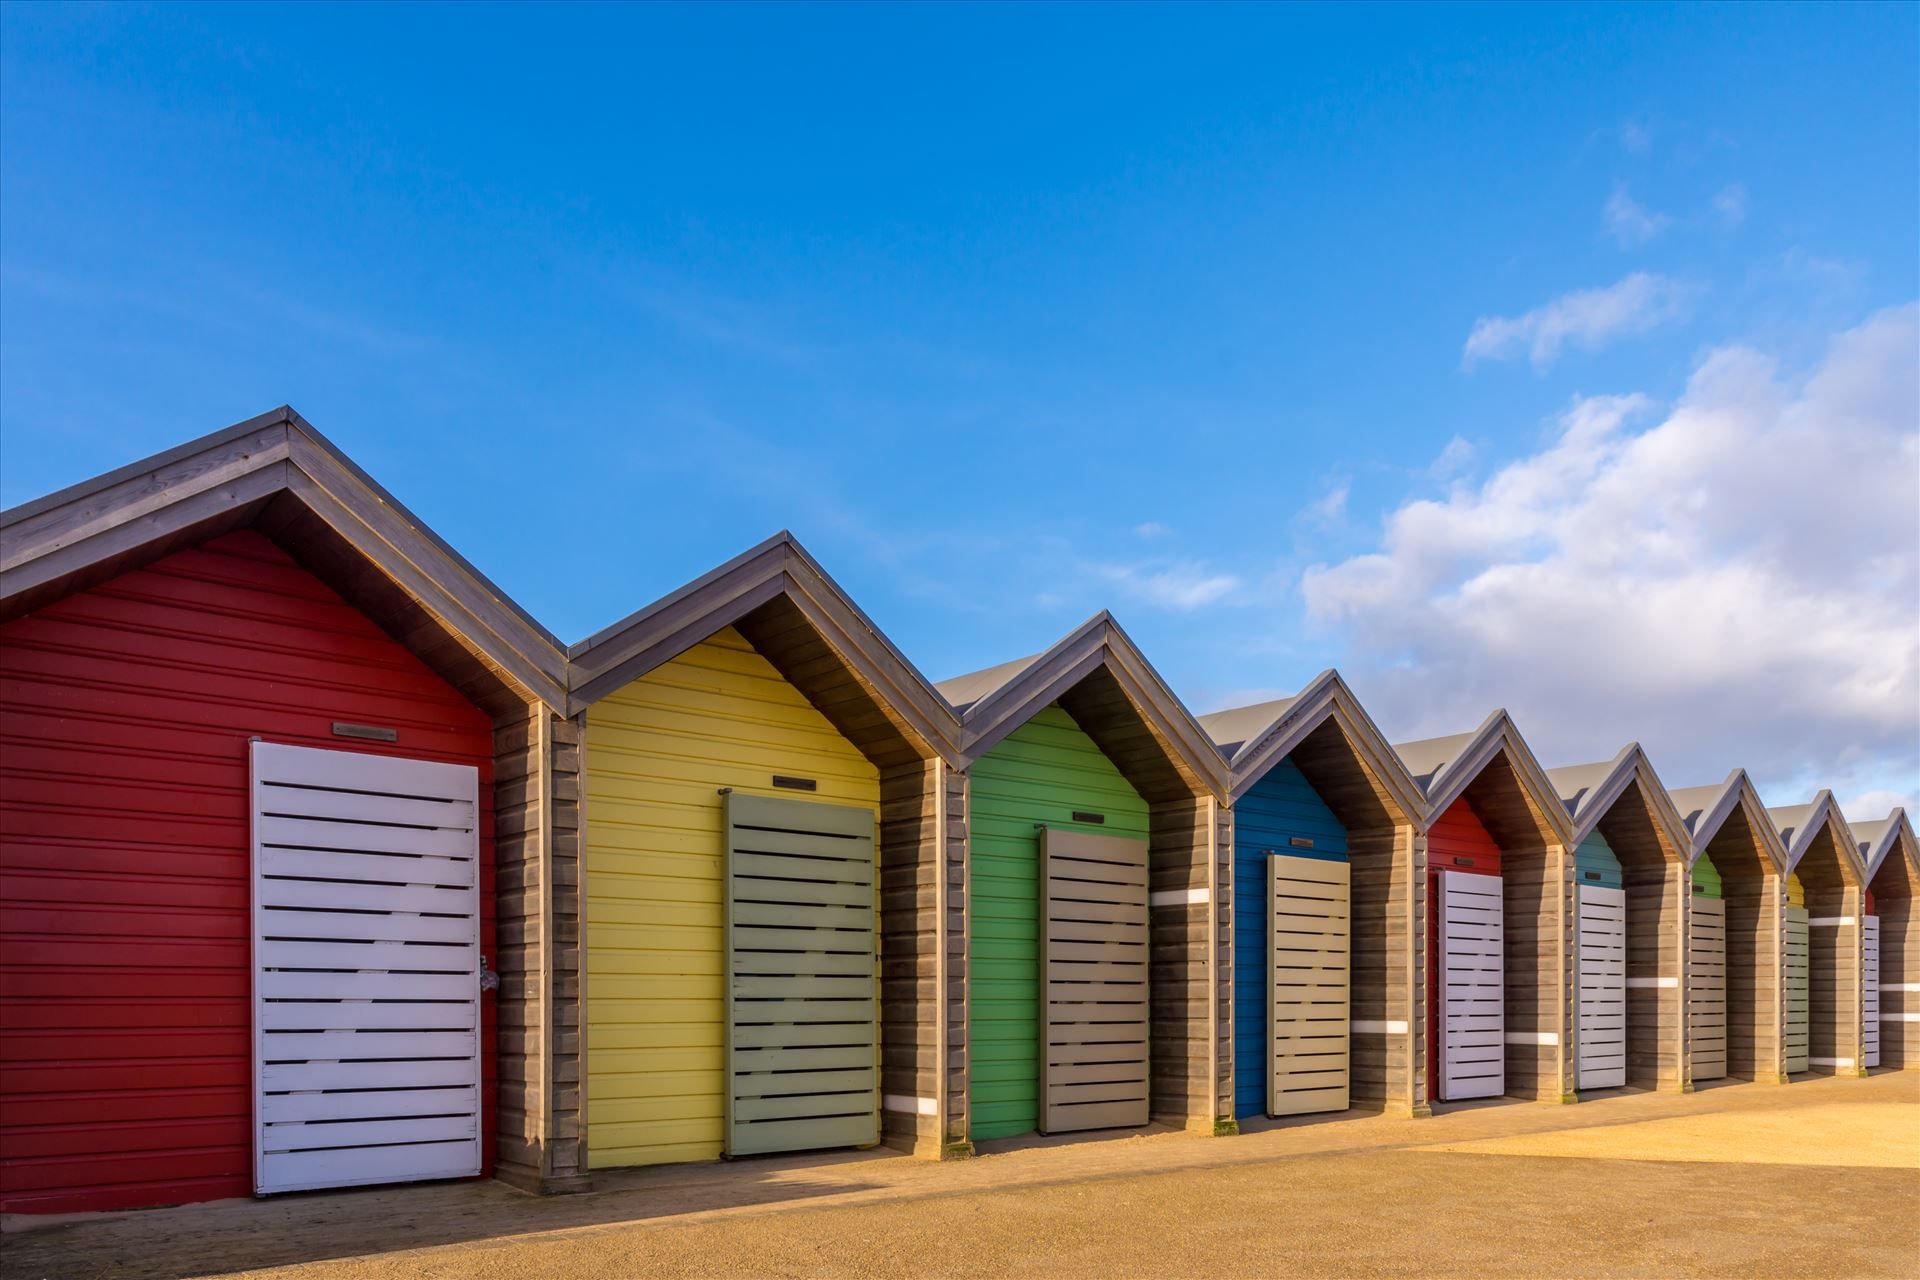 The beach huts at Blyth, Northumberland -  by philreay